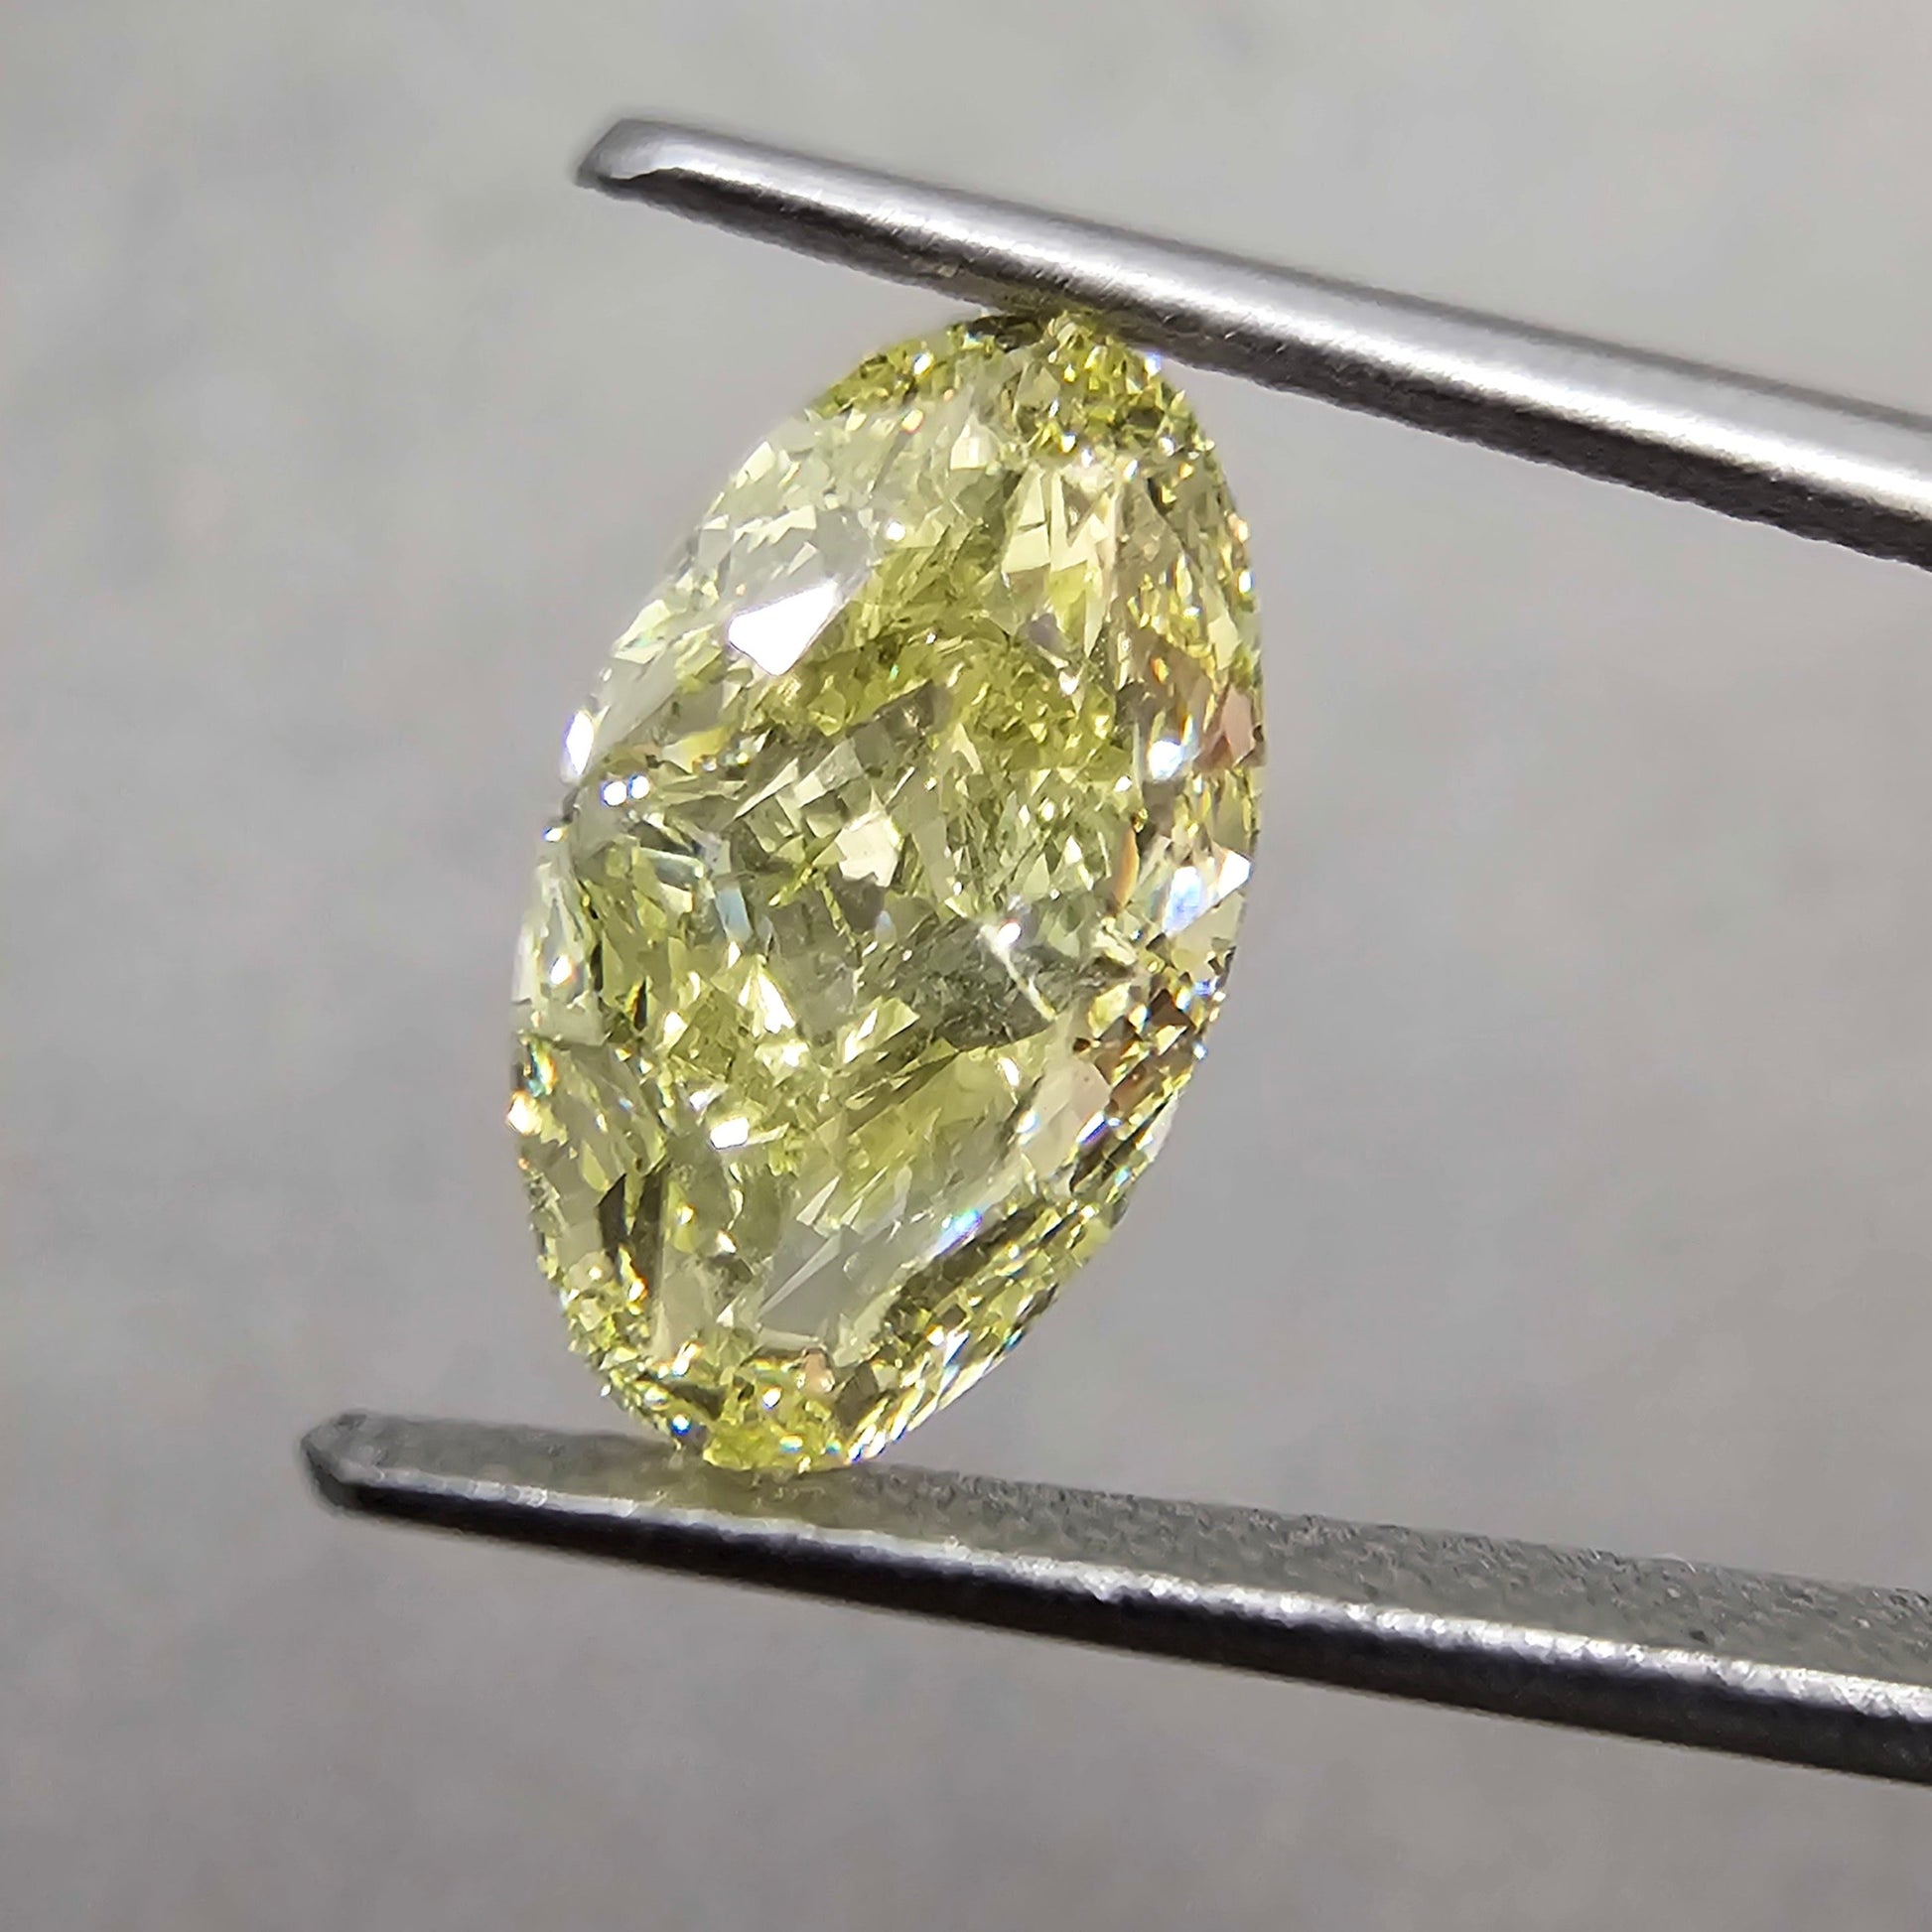 3.05 Carat Fancy Yellow Oval Cut Diamond VVS1 Clarity  GIA Certified Diamond Excellent + Very Good Cutting No Fluorescence 